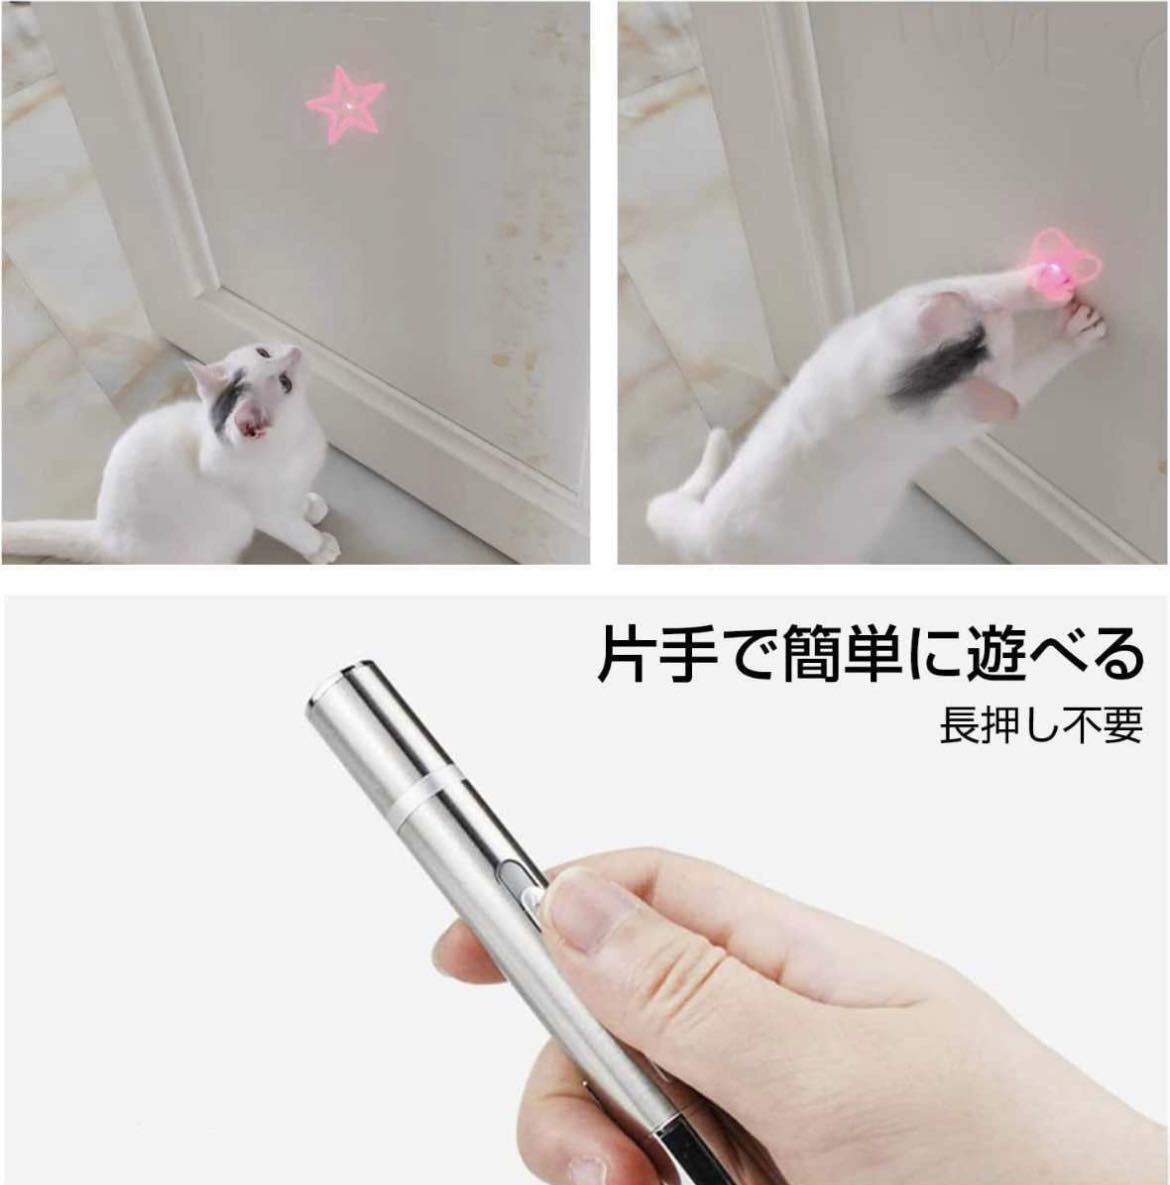  cat toy rechargeable USB motion shortage cancellation toy laser pointer LED light cat .... cat toy -stroke less cancellation 